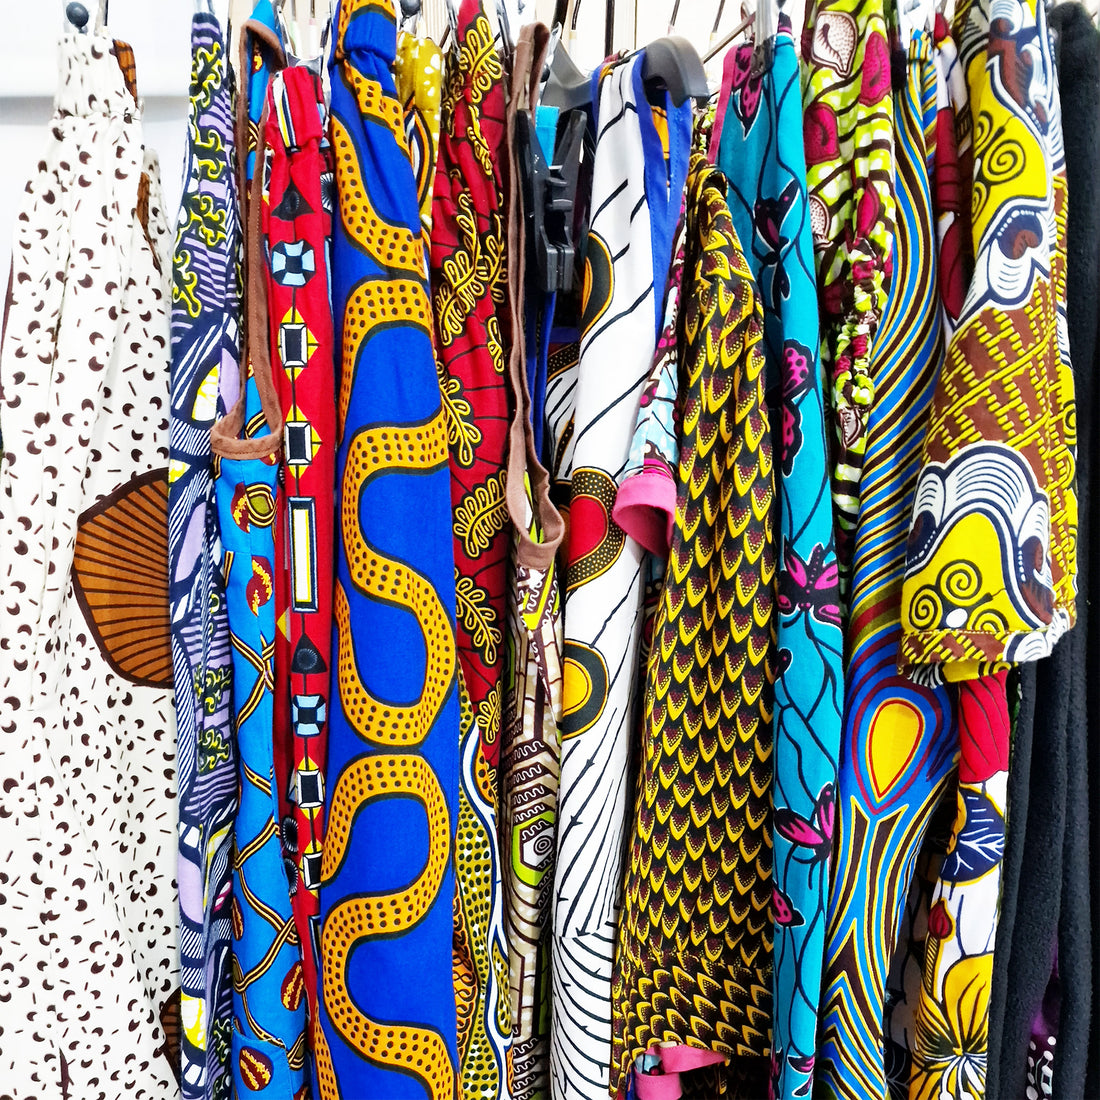 "Ready, Set, Shop! Our African Fashion Sample Sale Has Everything You Need to Look Amazing!"